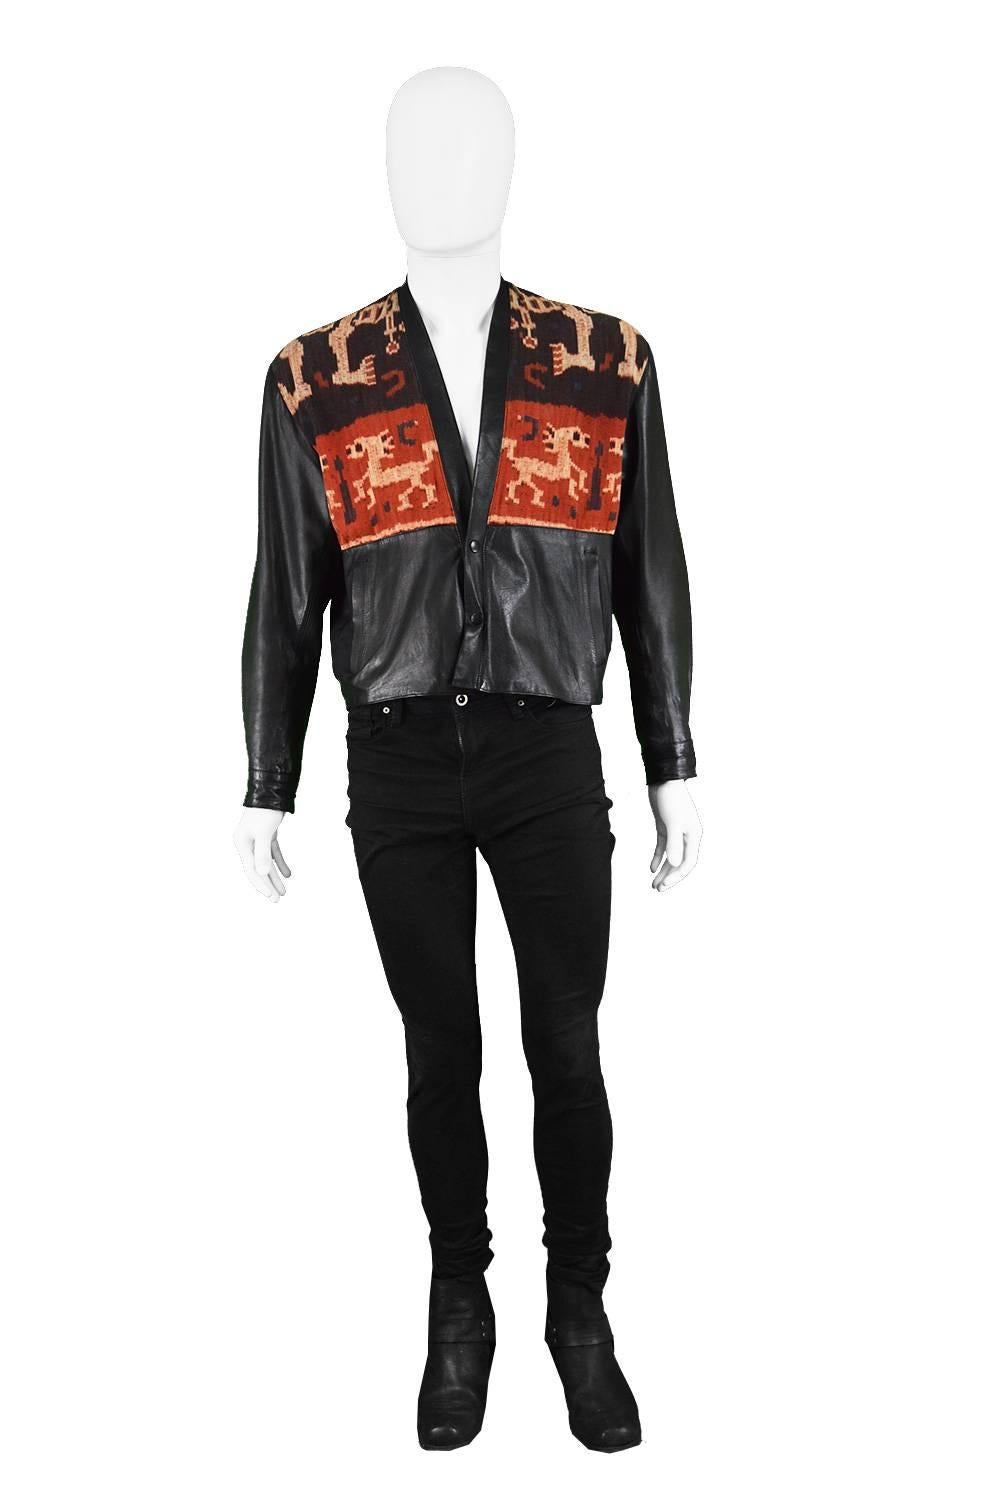 Abrasive Aorta Men's Vintage Leather & Handwoven Ikat Tapestry Jacket, 1980s

Estimated Size: Medium to Large. Please check measurements.
Chest - 44” / 112cm (allow a few inches room for movement)
Waist - 38” / 96cm
Length (Shoulder to Hem) - 21” /